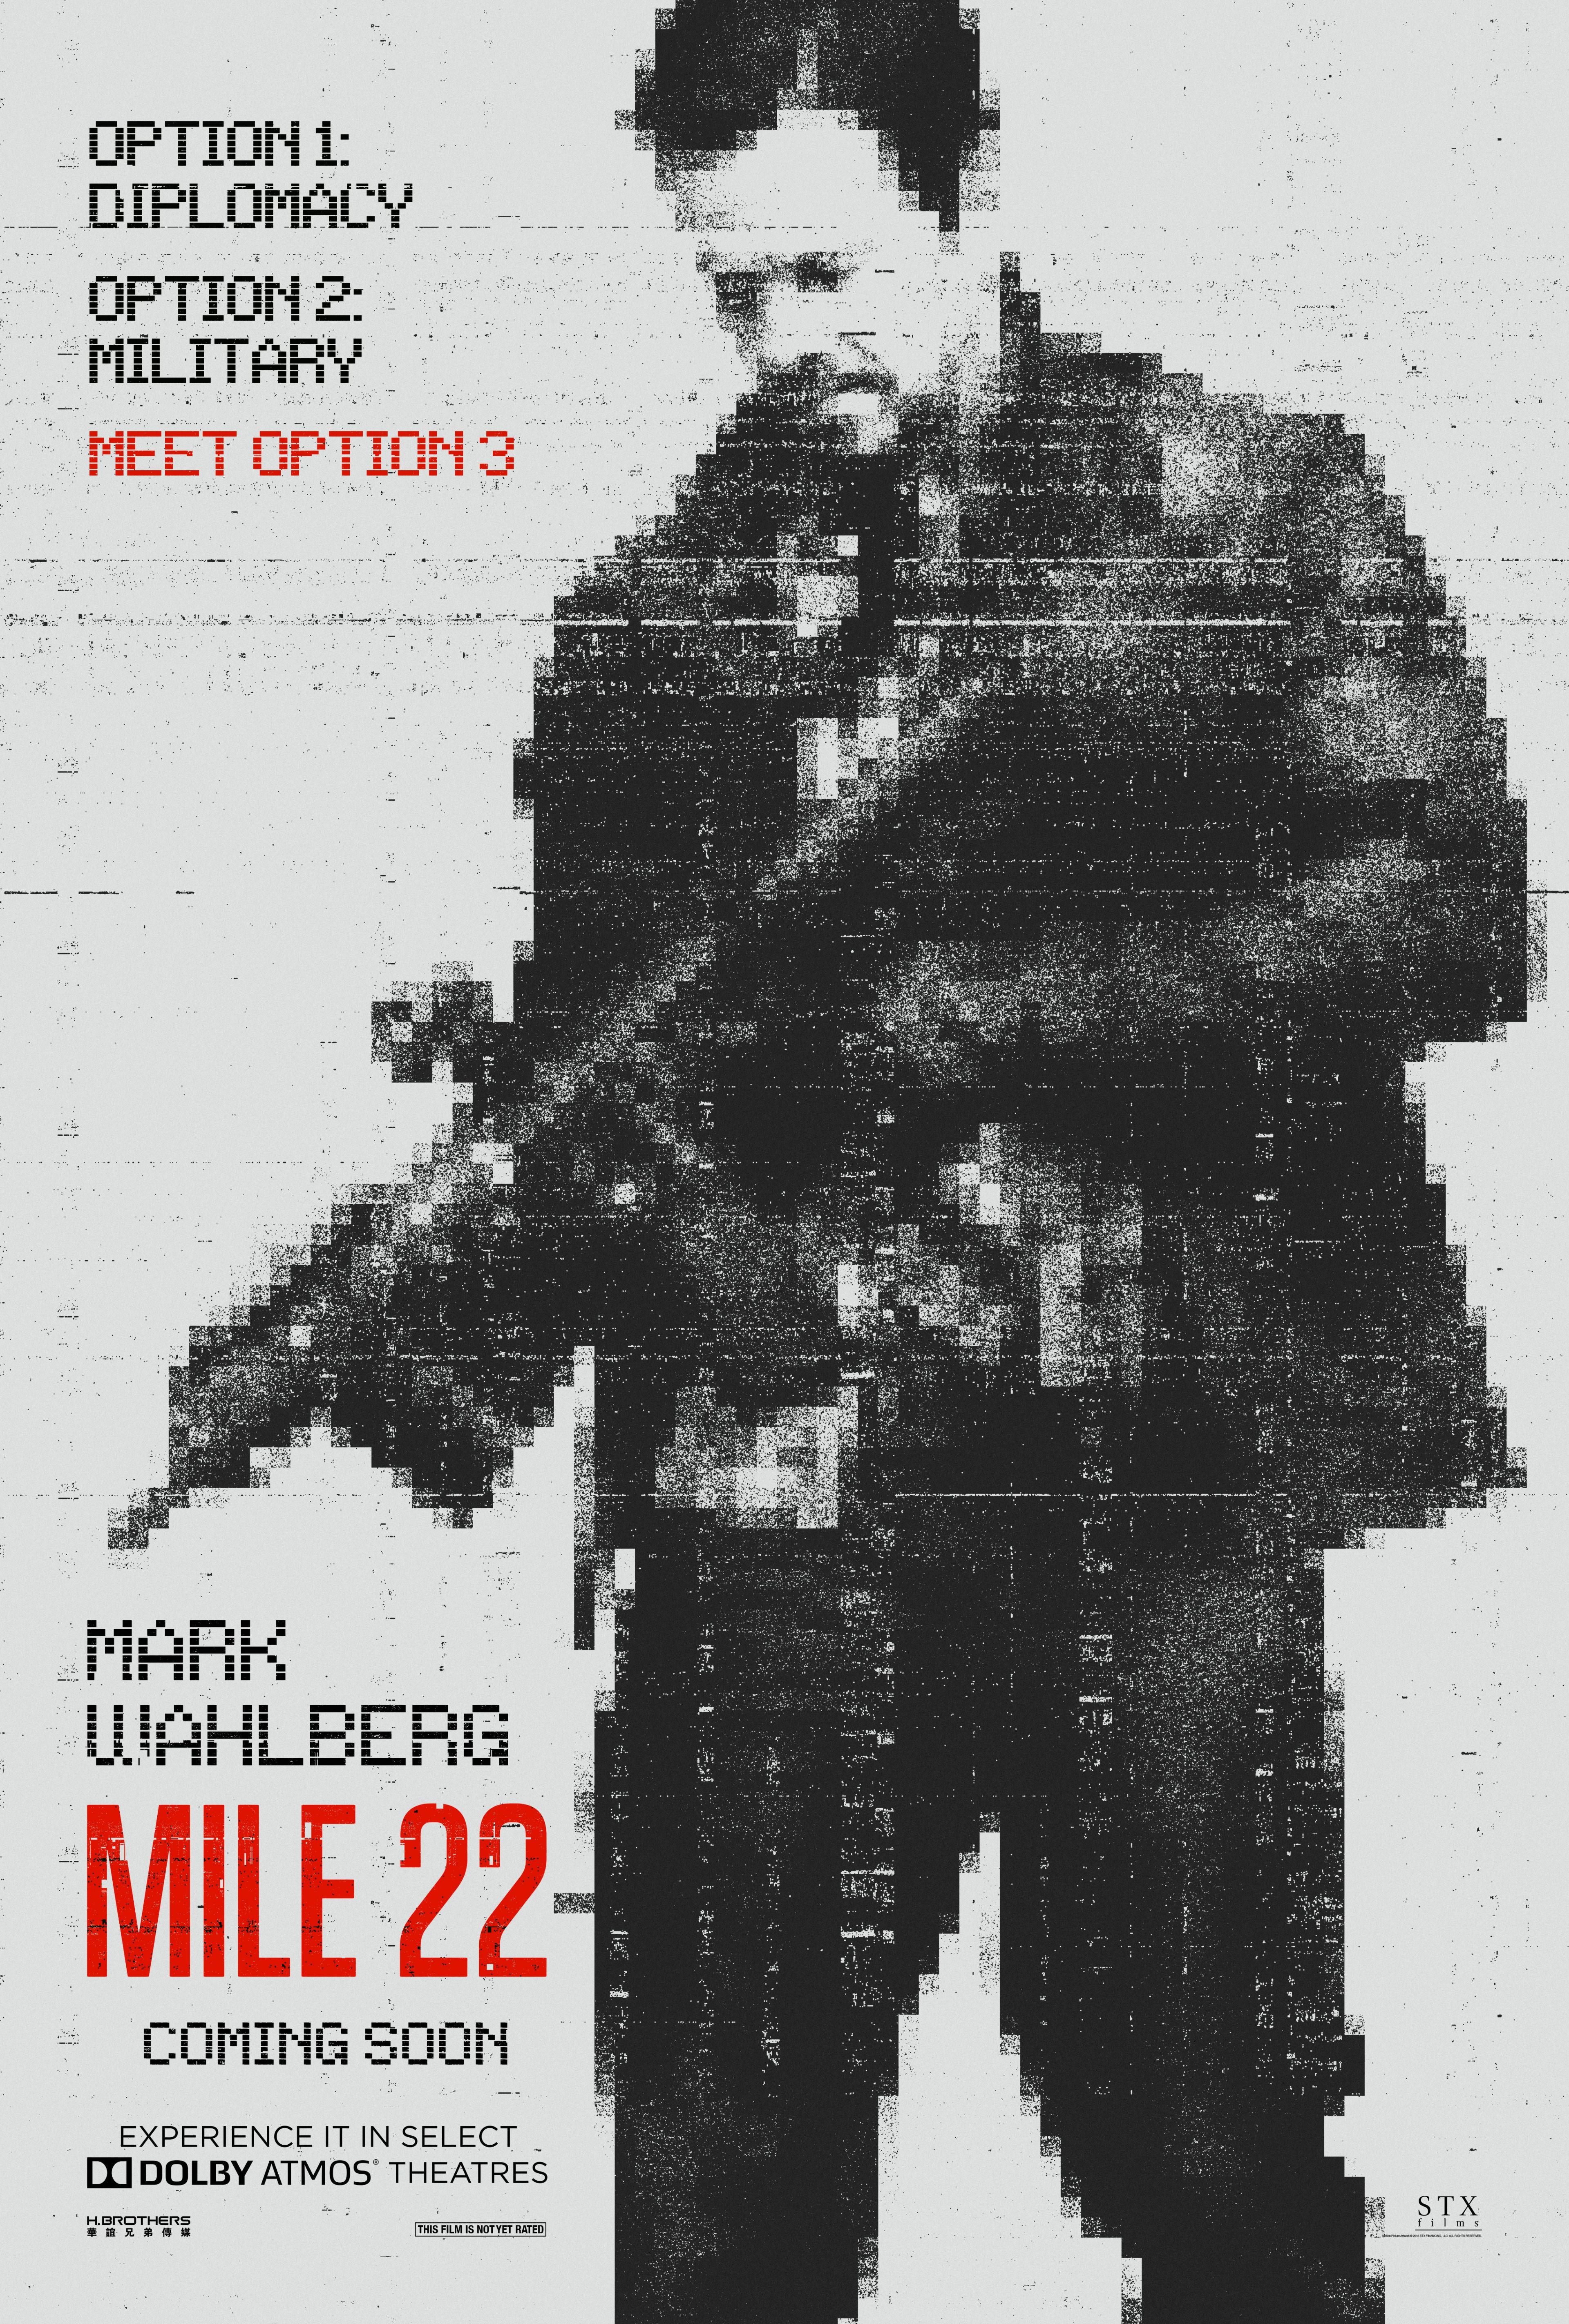 ART OF THE CUT with Melissa Lawson-Cheung and Colby Parker, Junior, ACE on editing "Mile 22" 17